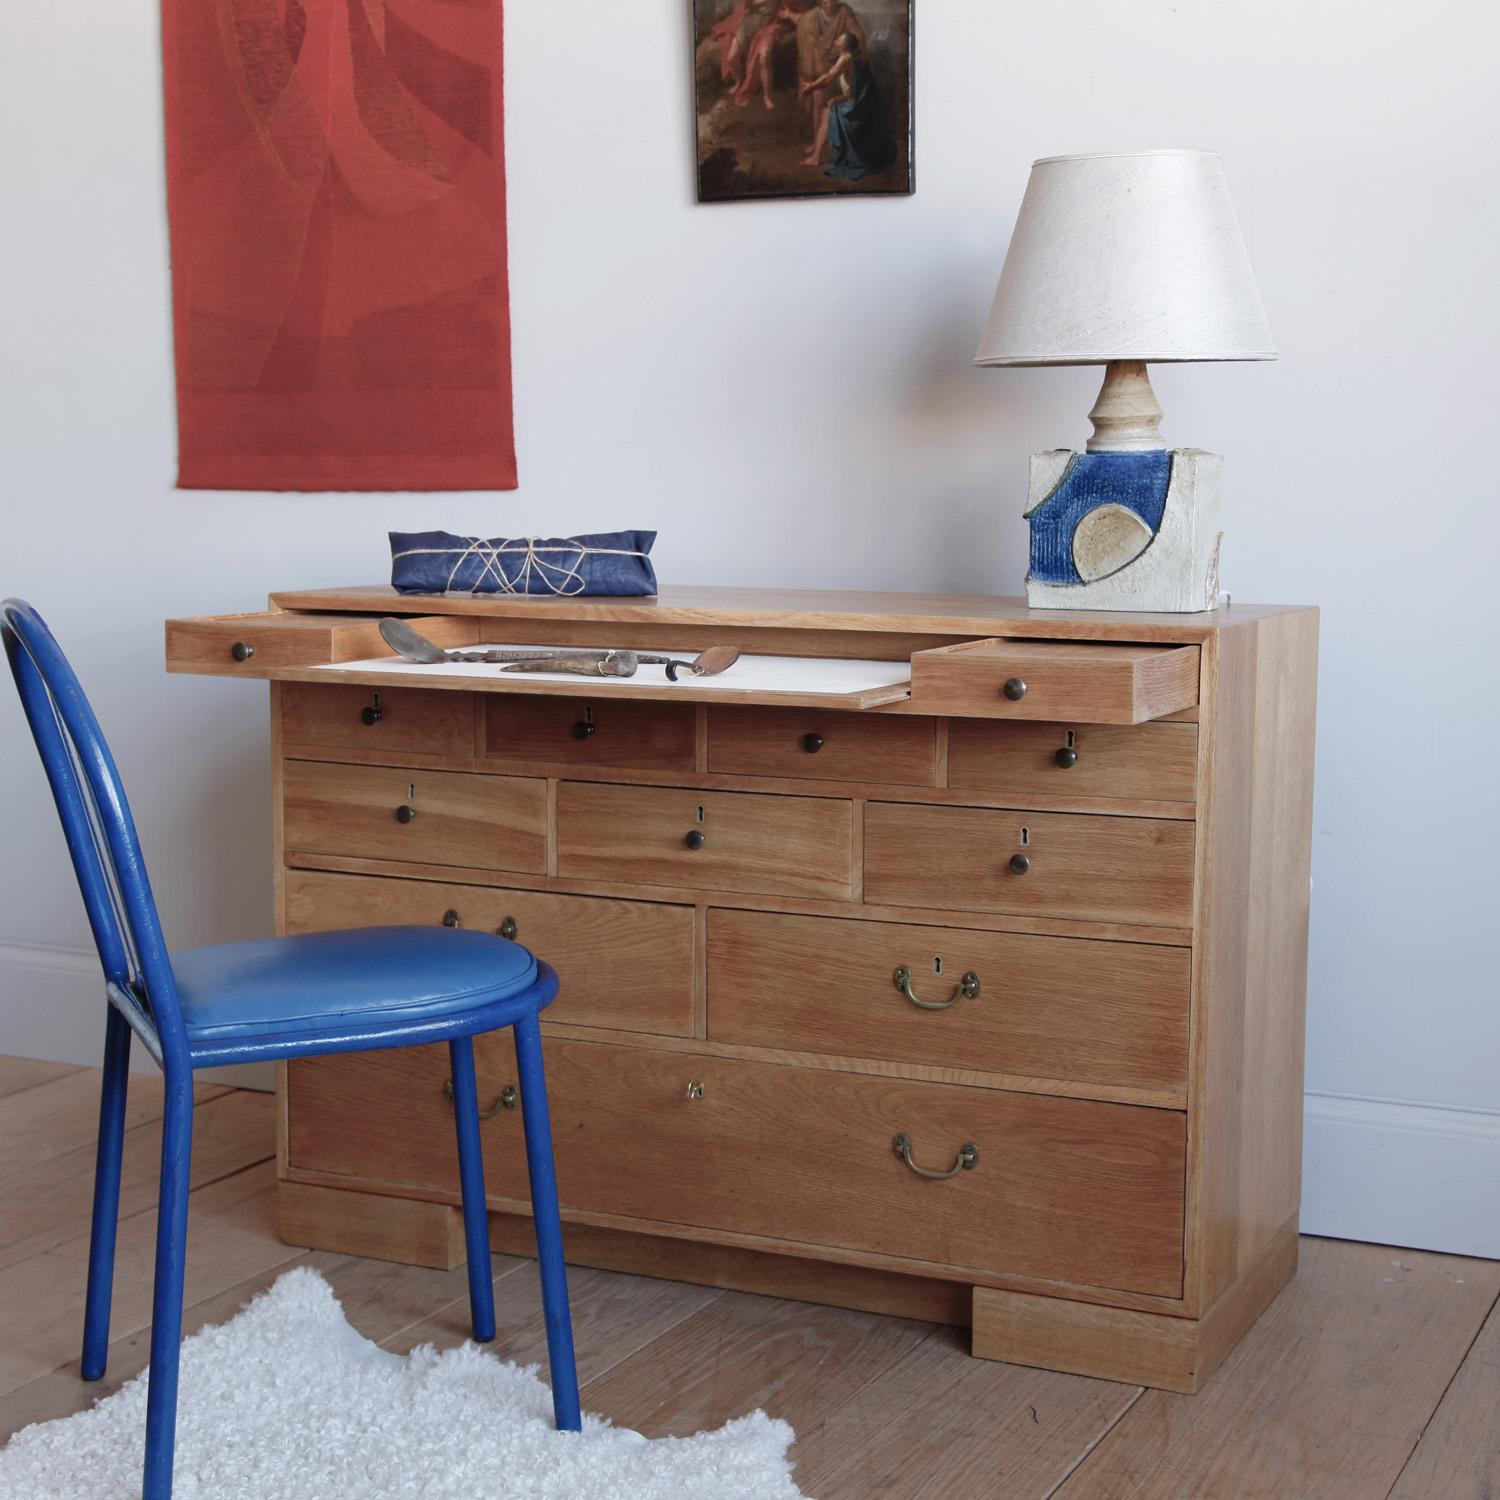 Mogens Koch designed this secretaire for the Sønderborg Statshospital (he also designed the building itself). It was produced in a very limited quantity for the staff there. Oak, with a sliding leather desktop. A beautifully made case piece in